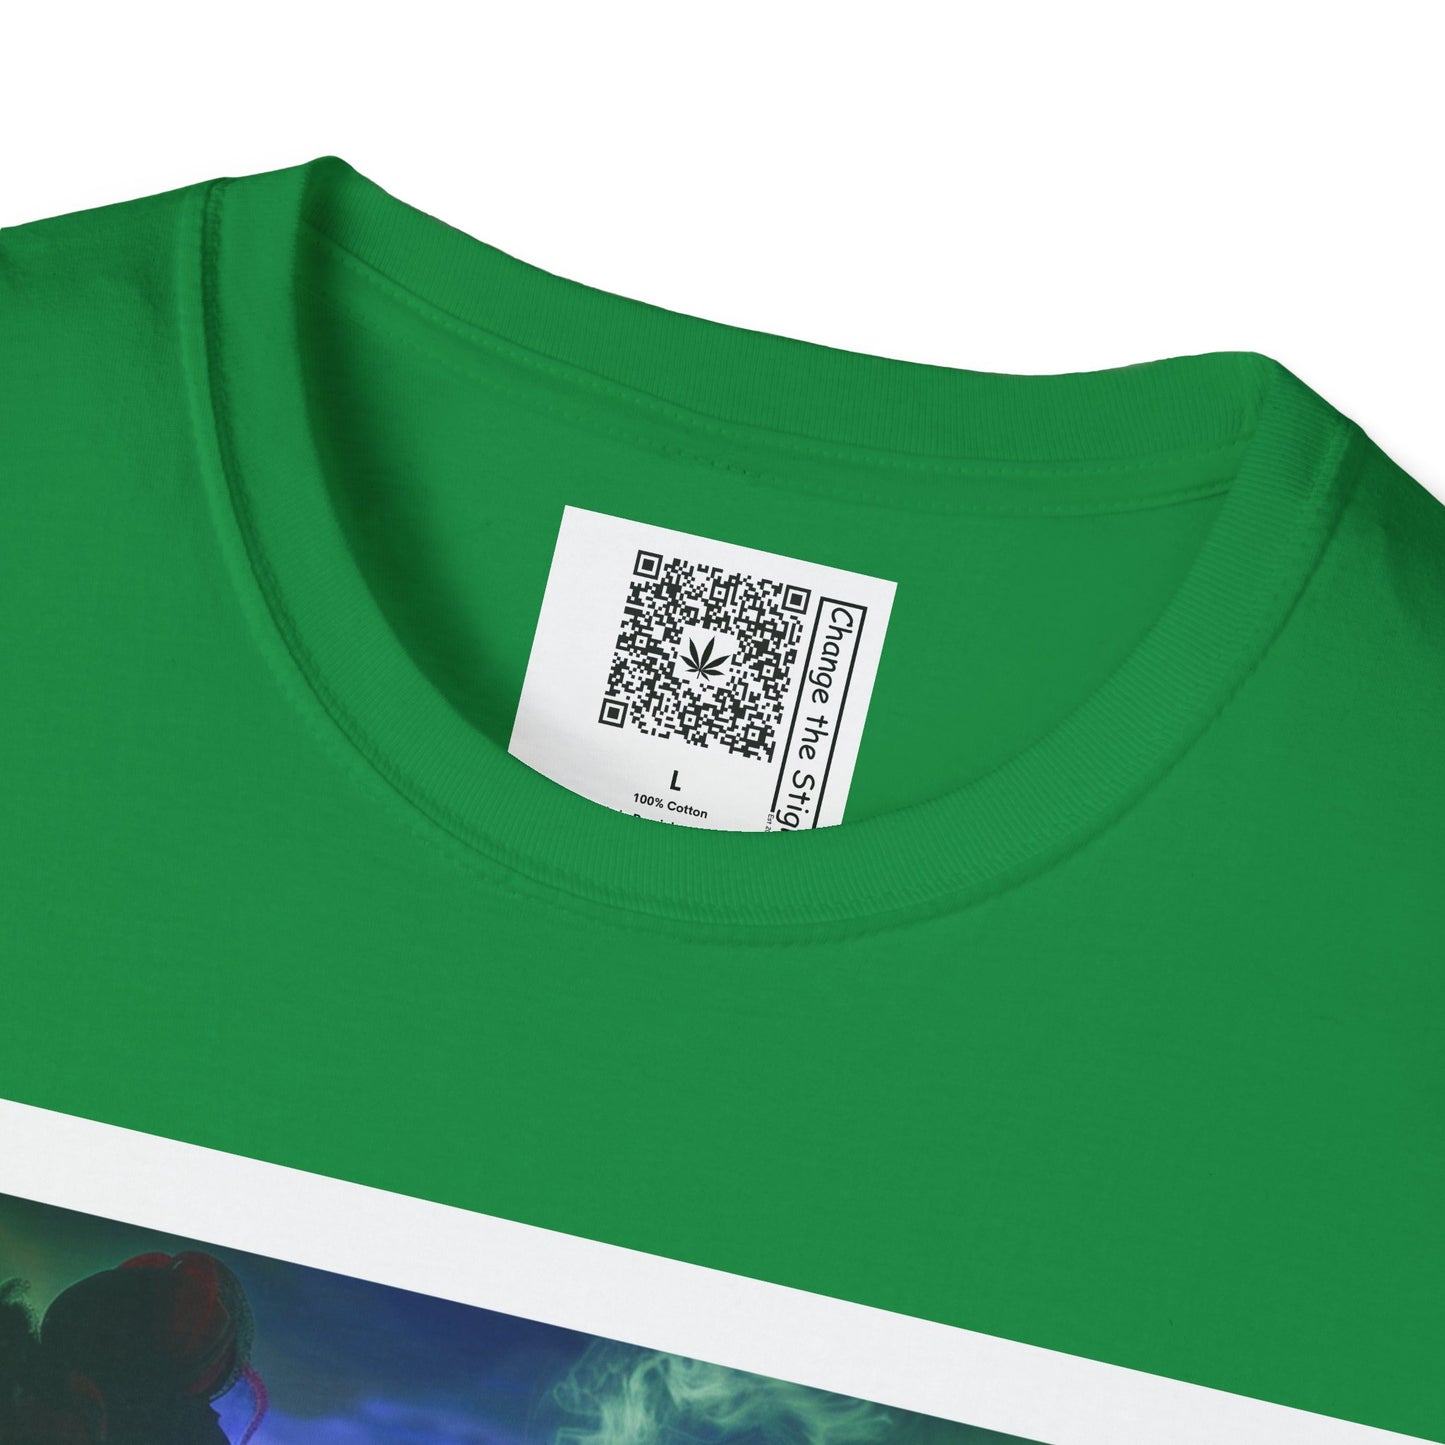 Change the Stigma, Irish Green color, shirt featuring a woman smoking cannabis while bowling, shirt is open showing QR code tag